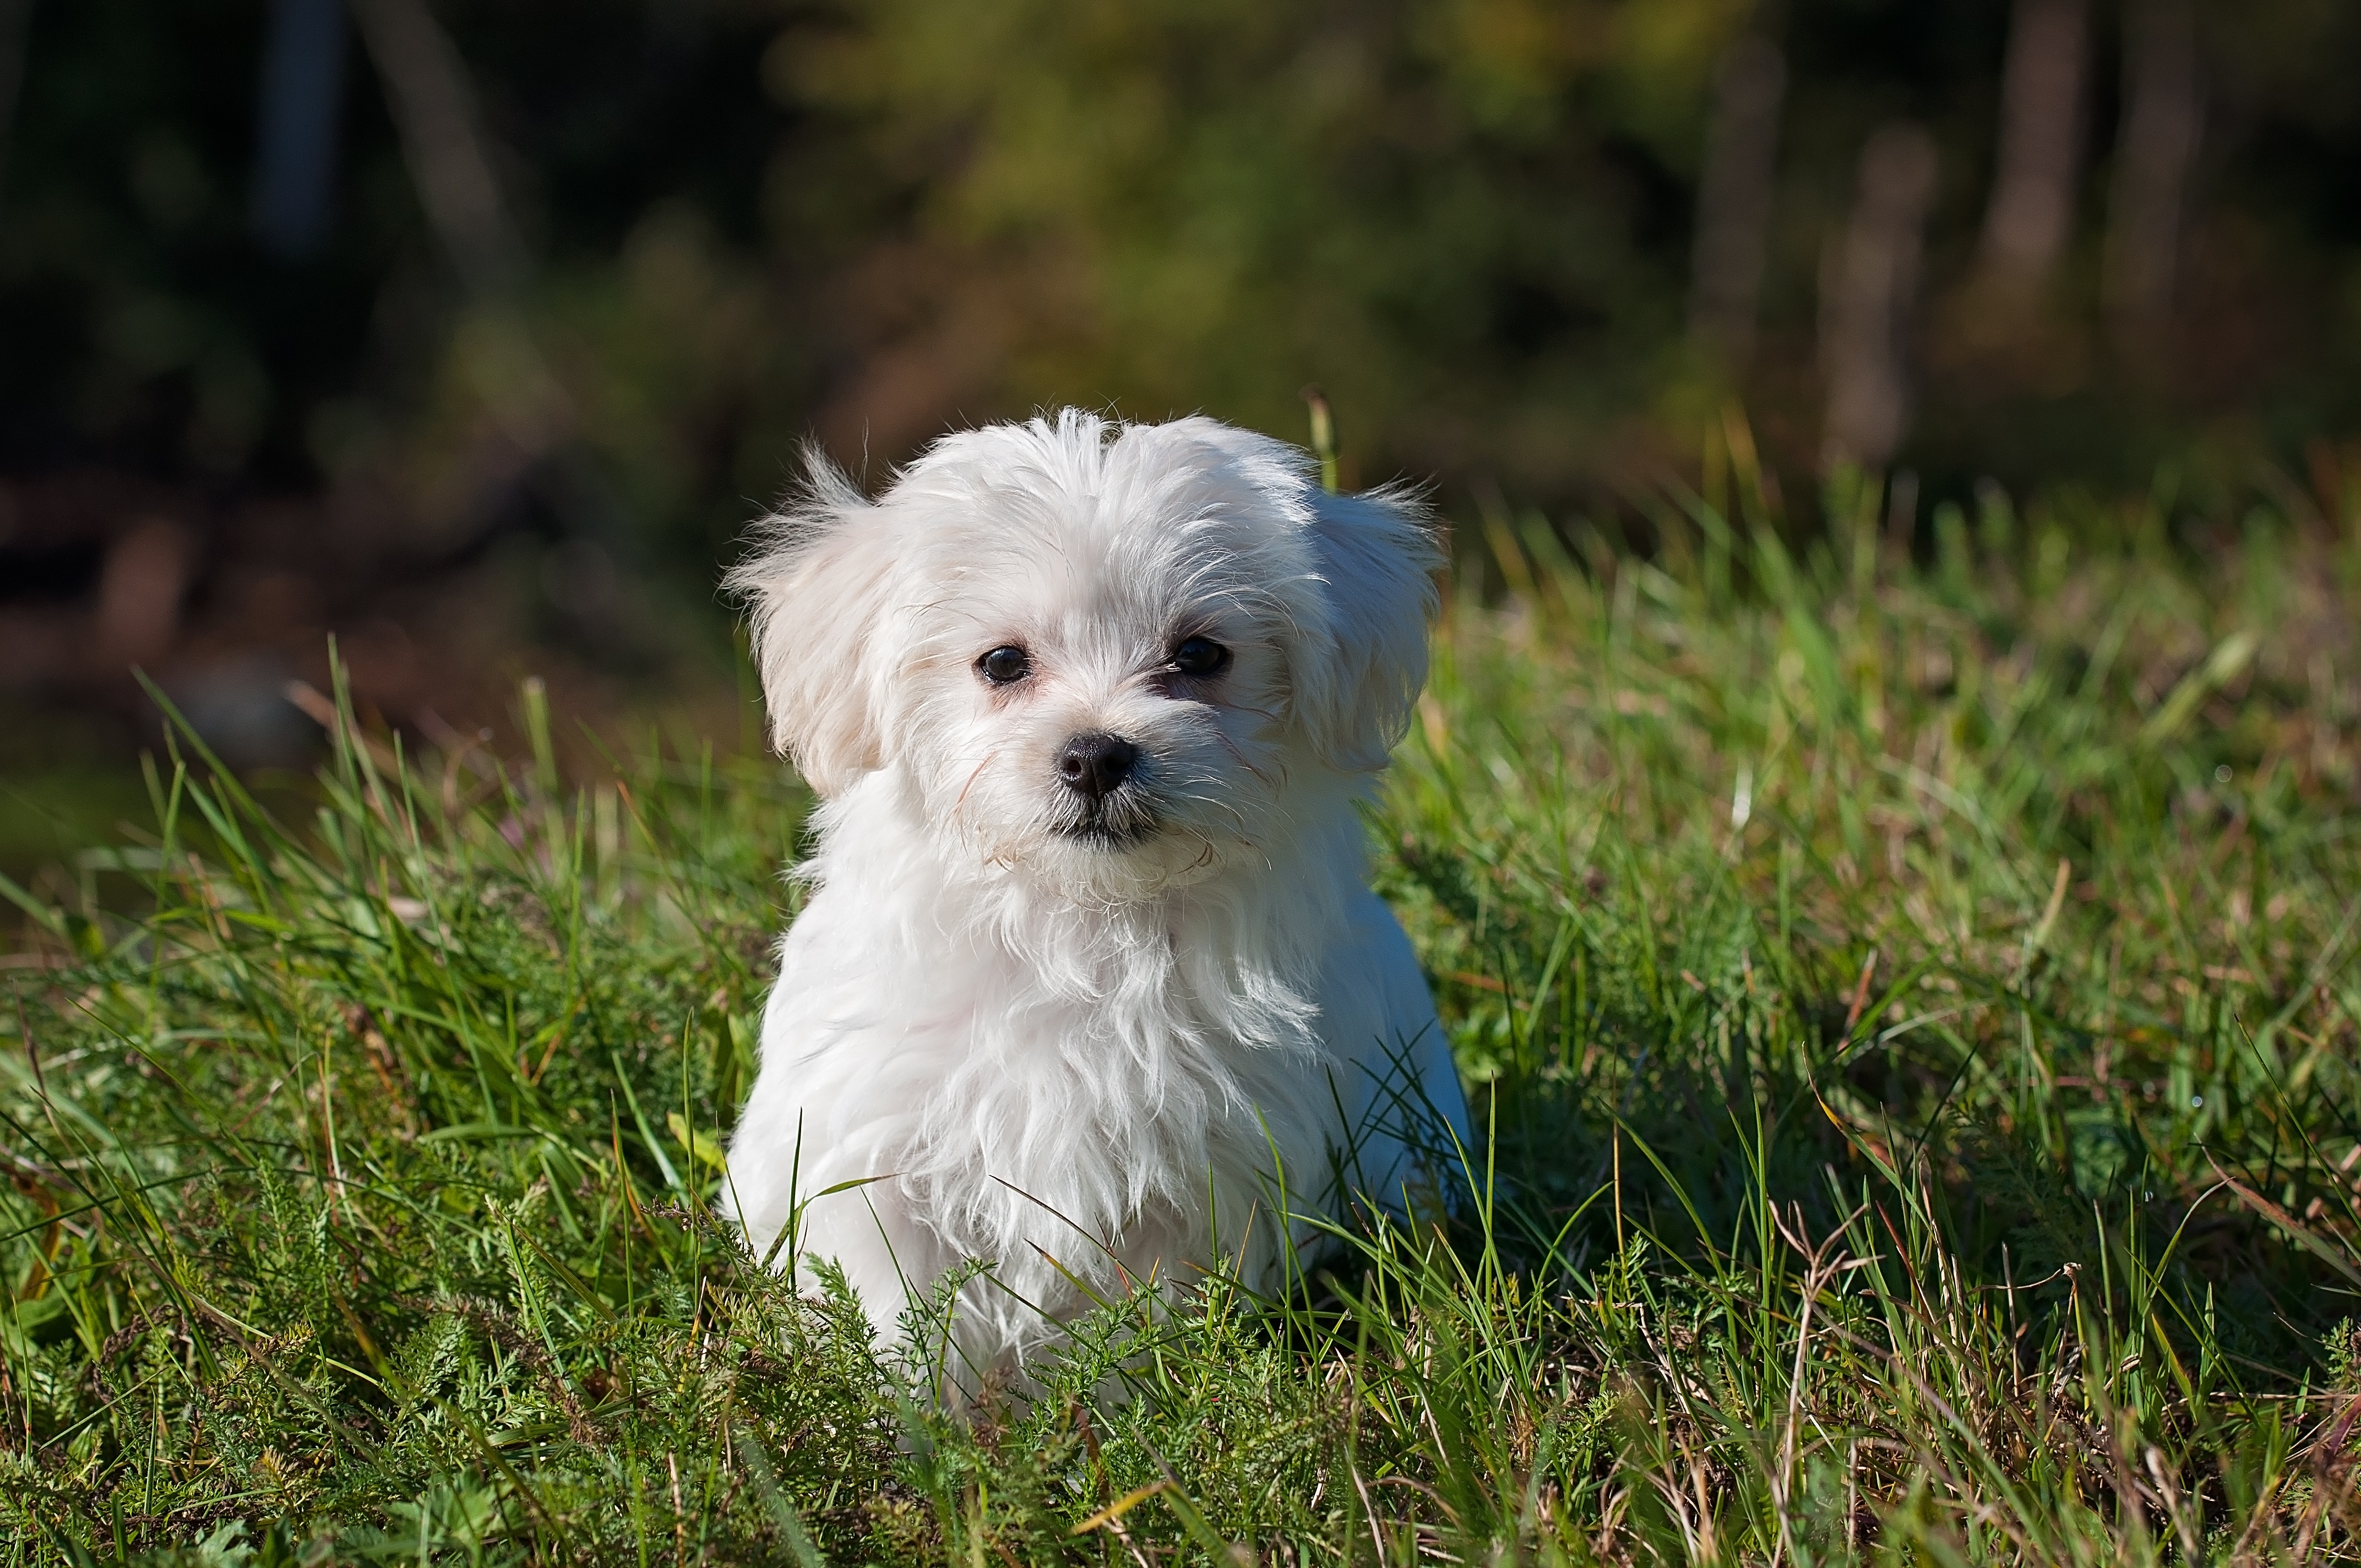 best clippers for maltese shih tzu